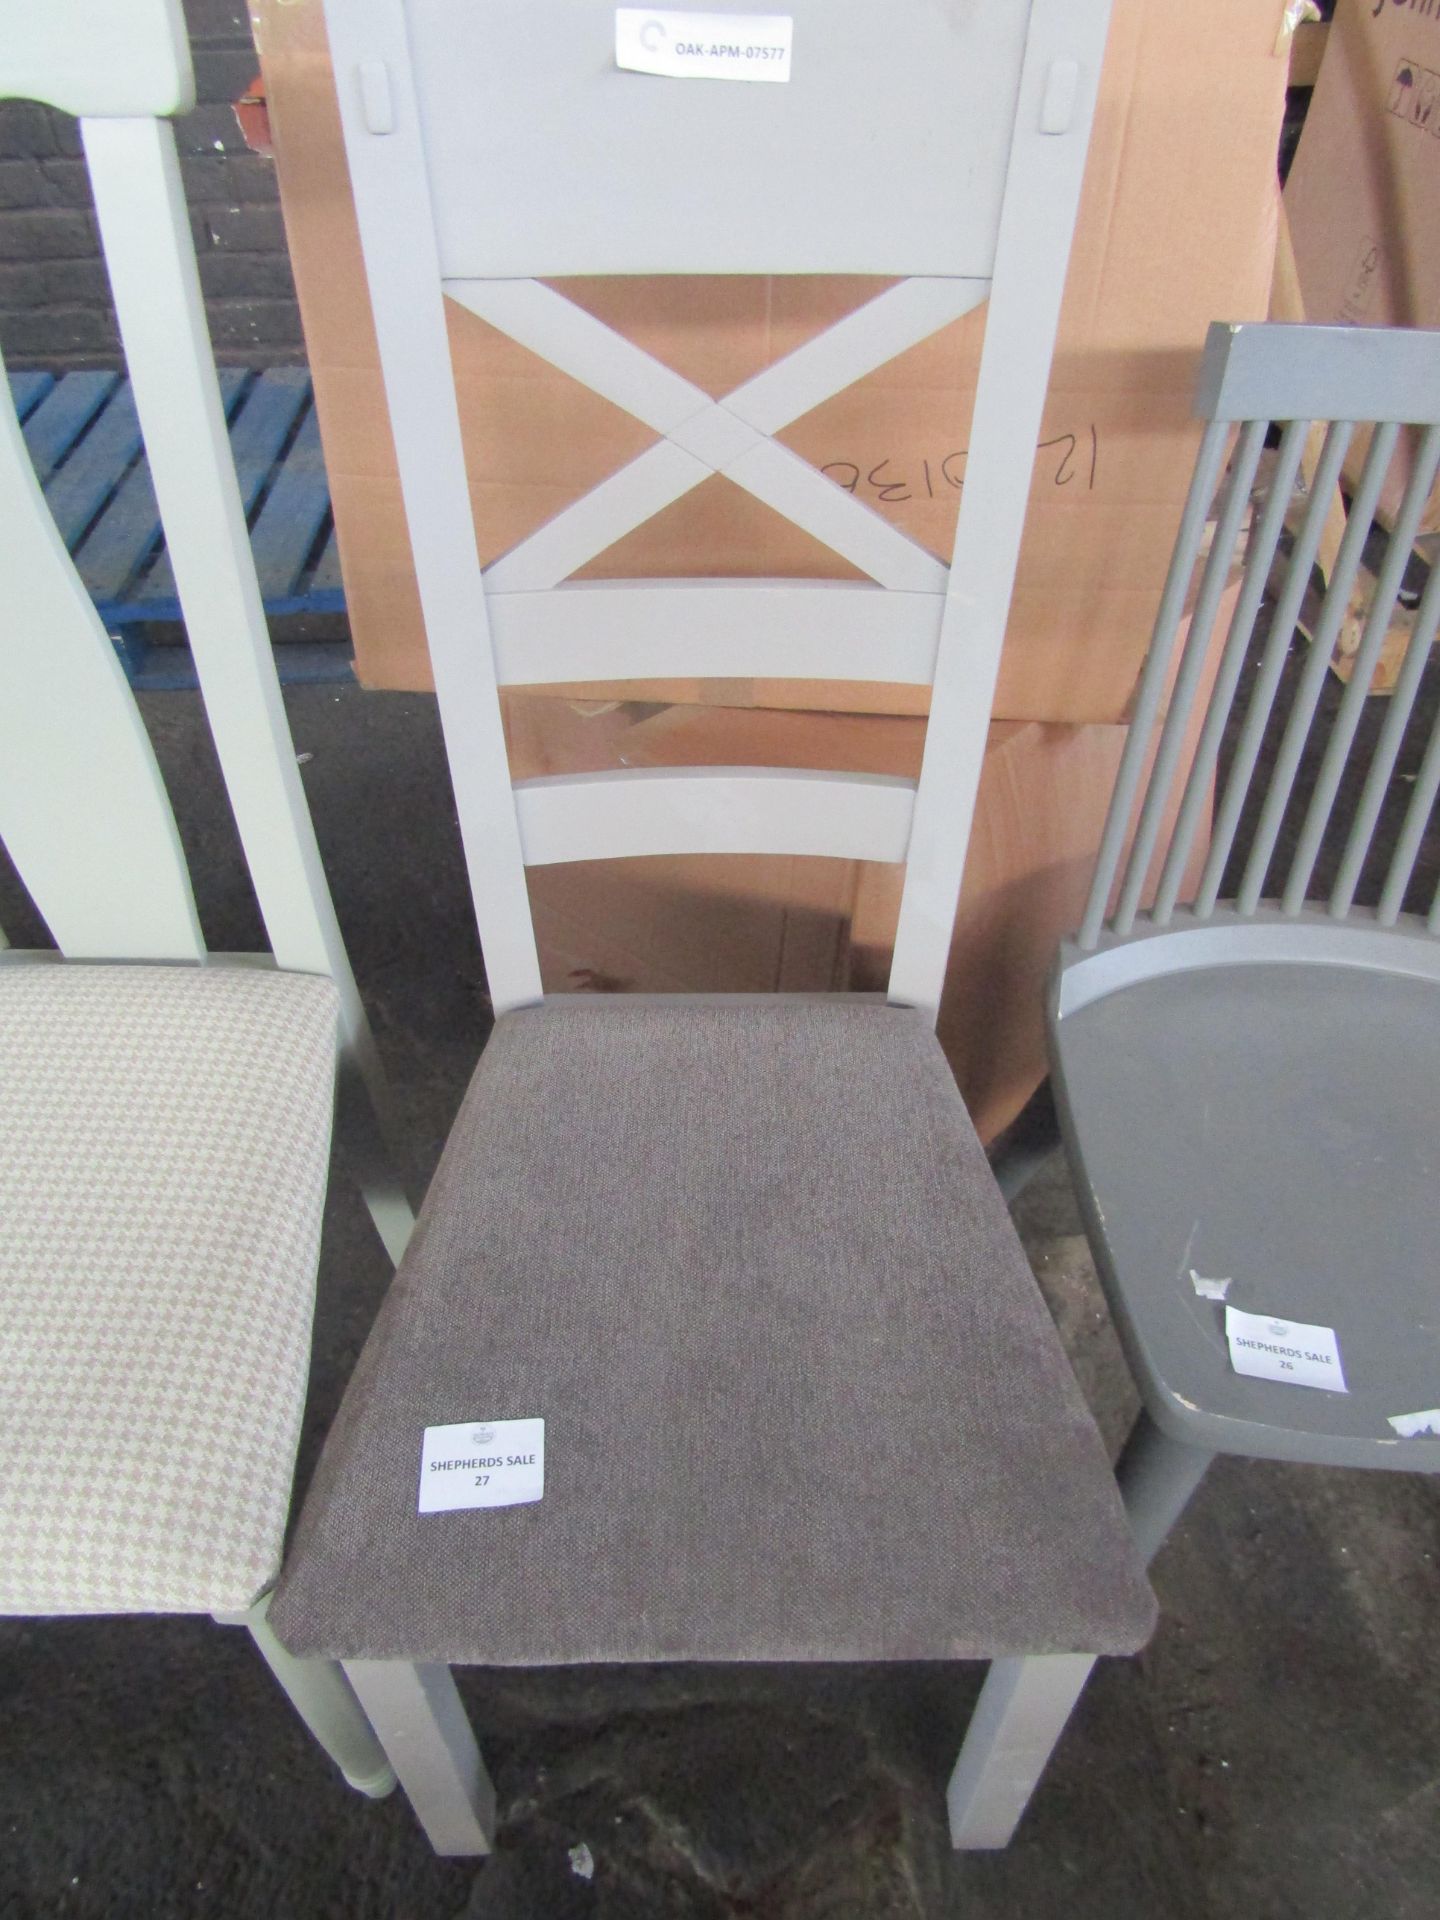 Oak Furnitureland St Ives Light Grey Painted Chair with Plain Charcoal Fabric Seat RRP 170.00